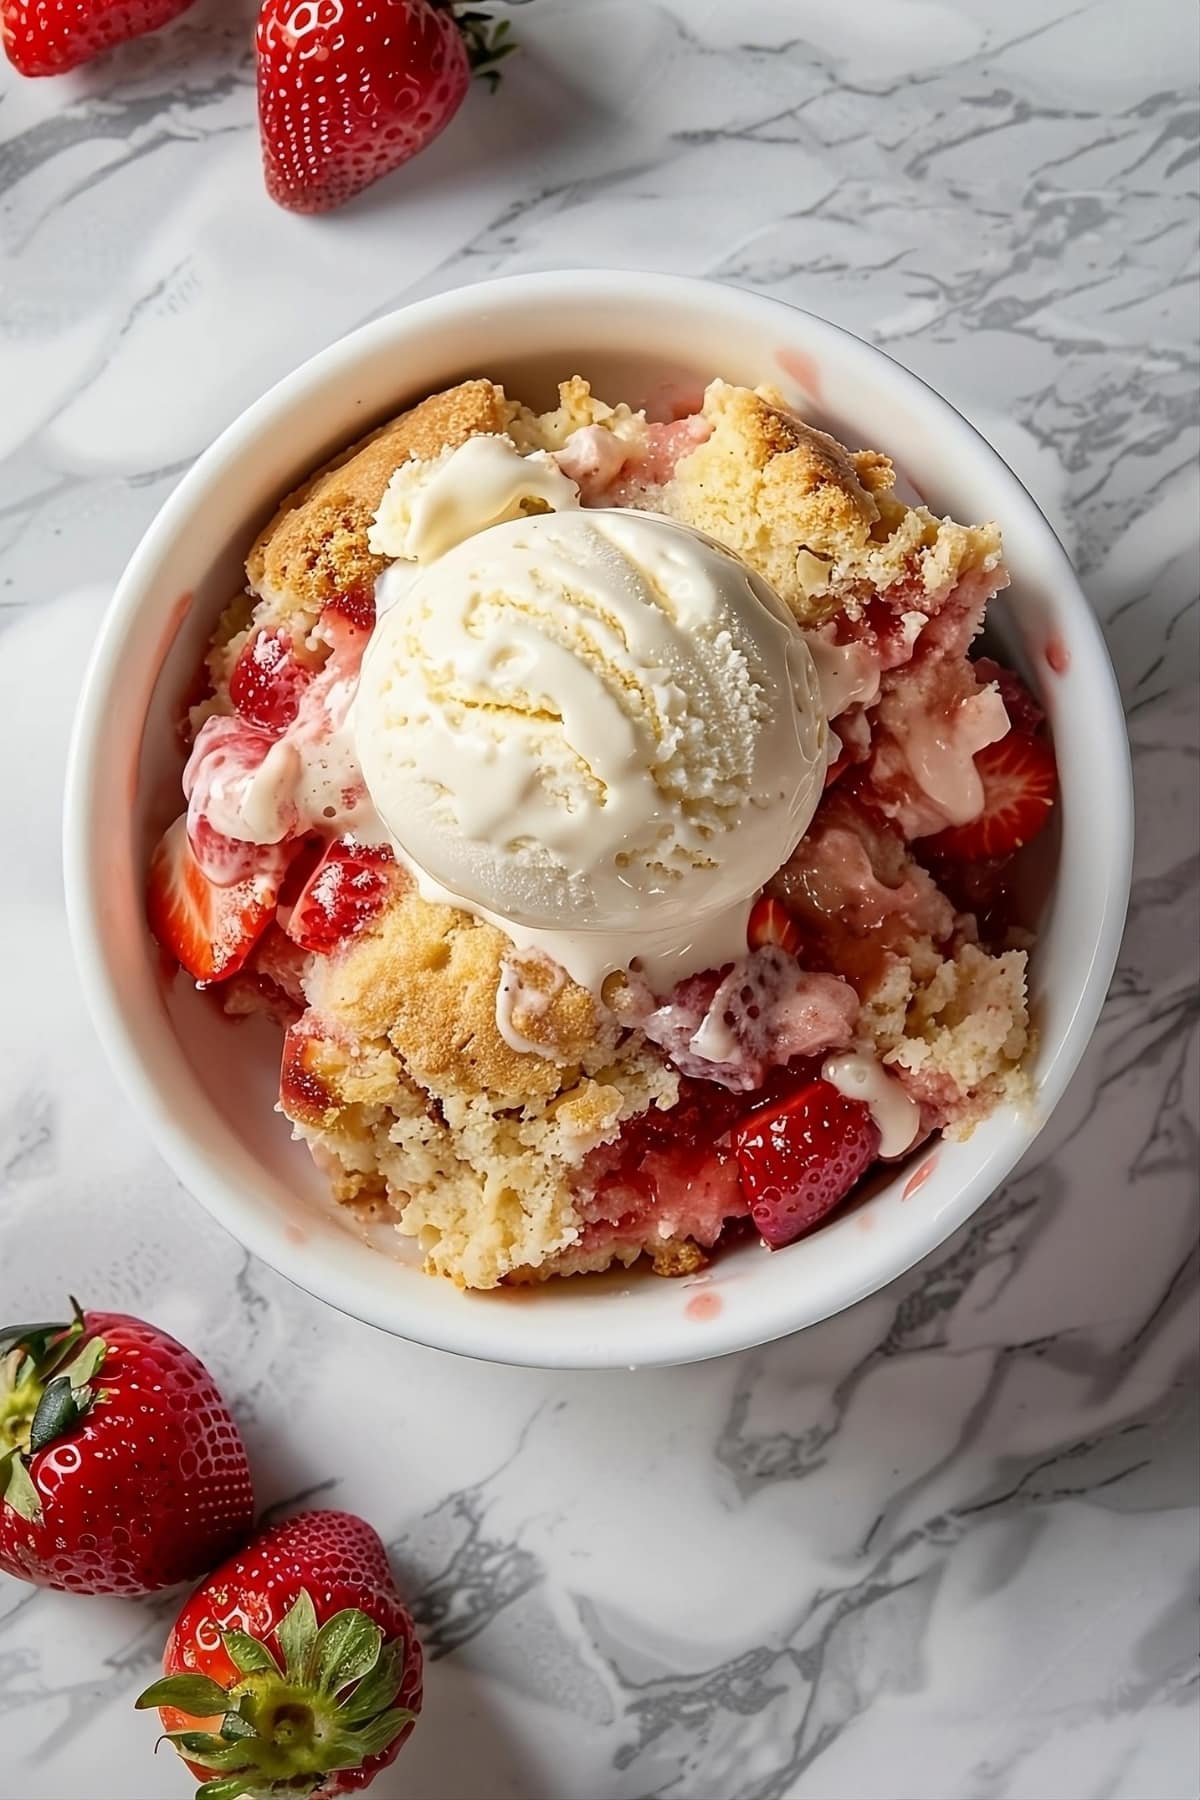 Strawberry dump cake with vanilla ice cream, top view on a white bowl.